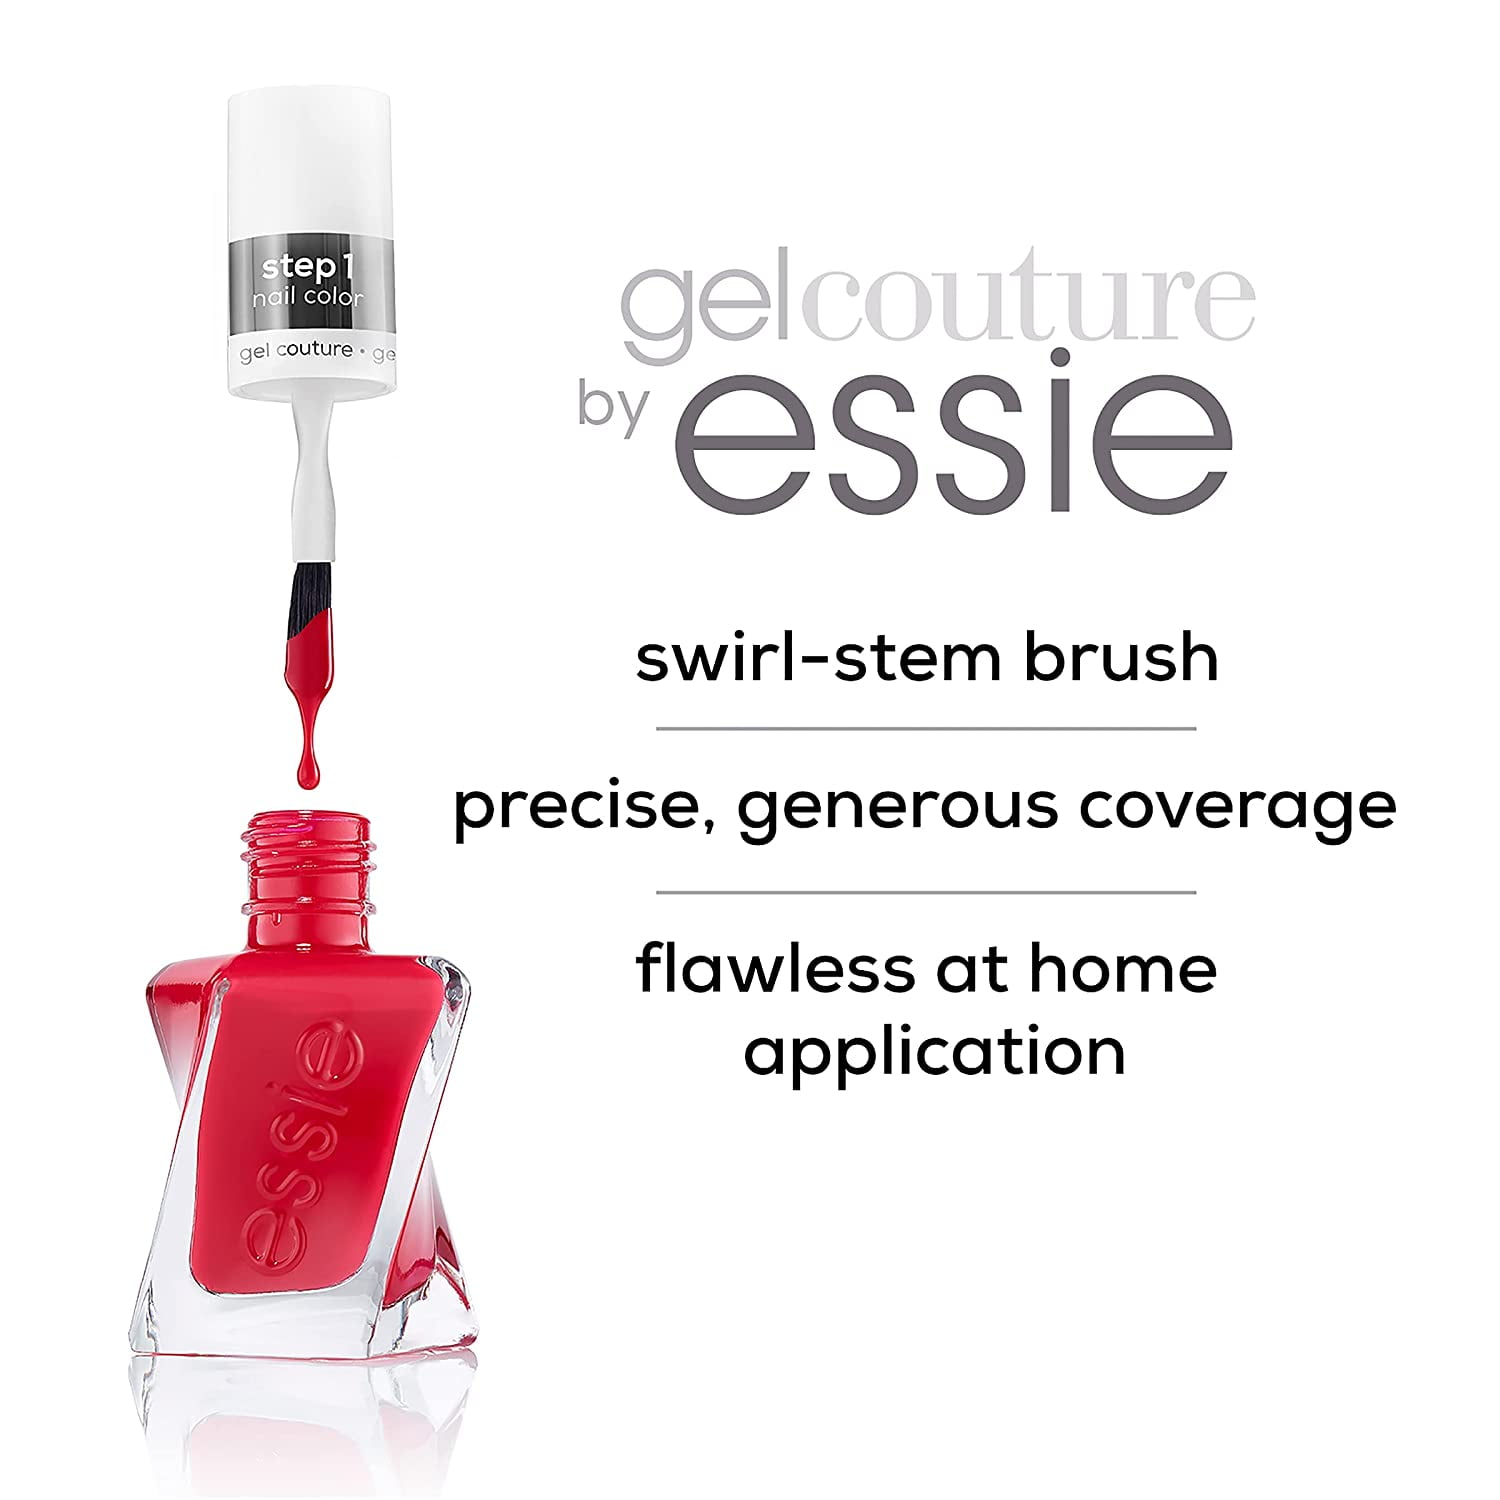 edition and limited longwear new 1 mini Essie the best jitters, couture rock runway, gel featuring gift kit gel sellers coat,, - couture color top nail 3 pre-show holiday set, piece